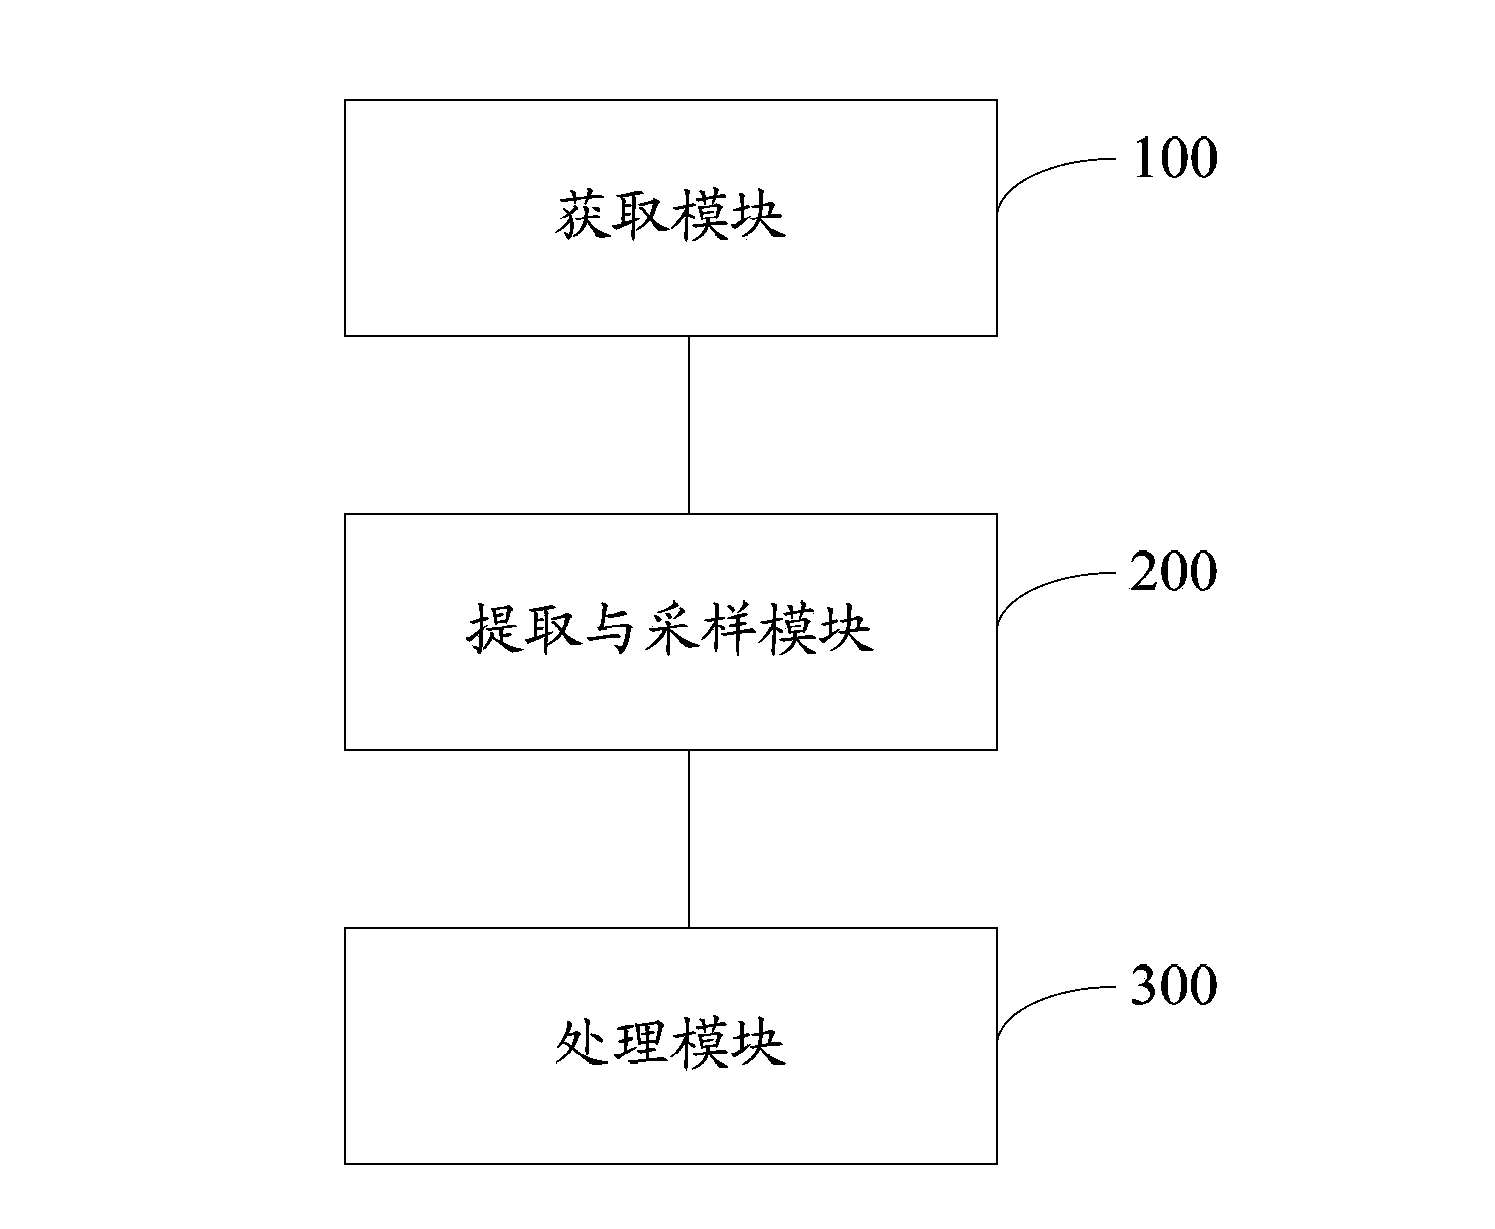 Video denoising processing method and device based on fixed scene